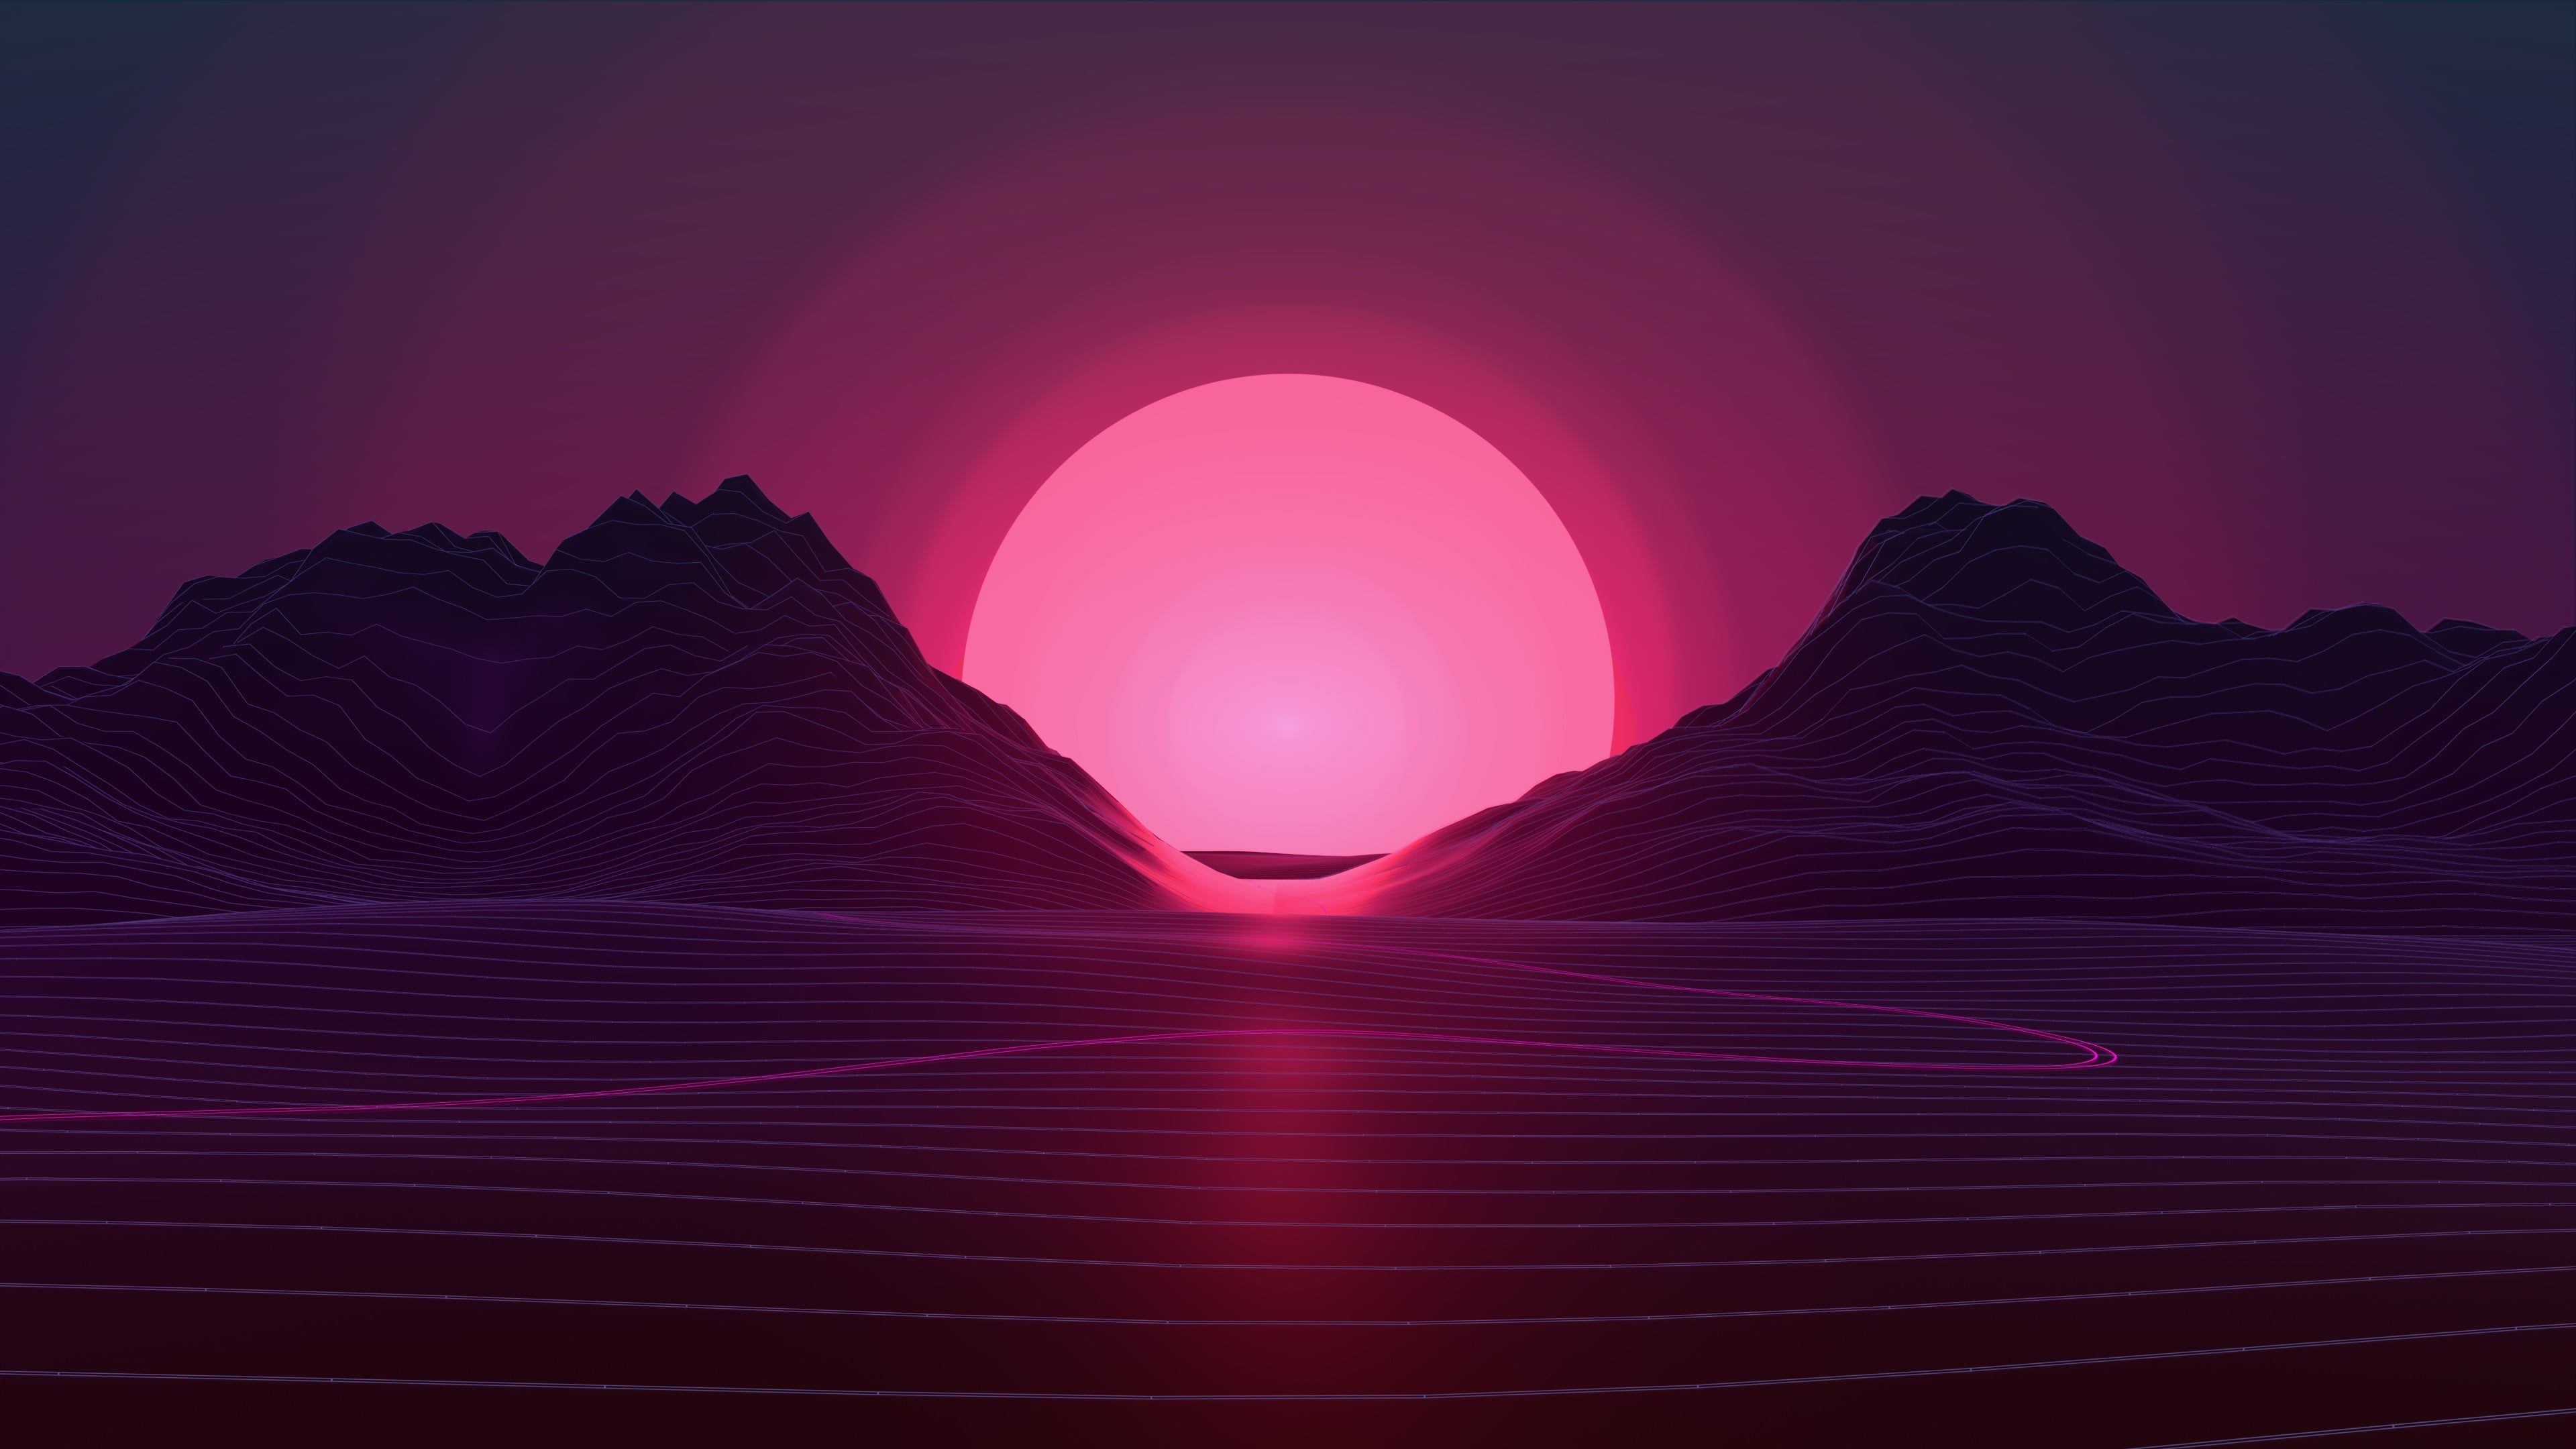 mountain and sun wallpaper, mountain with background of sunrise digital wallpaper #neon #sunset Retro style. Vaporwave wallpaper, Neon wallpaper, Sunset wallpaper